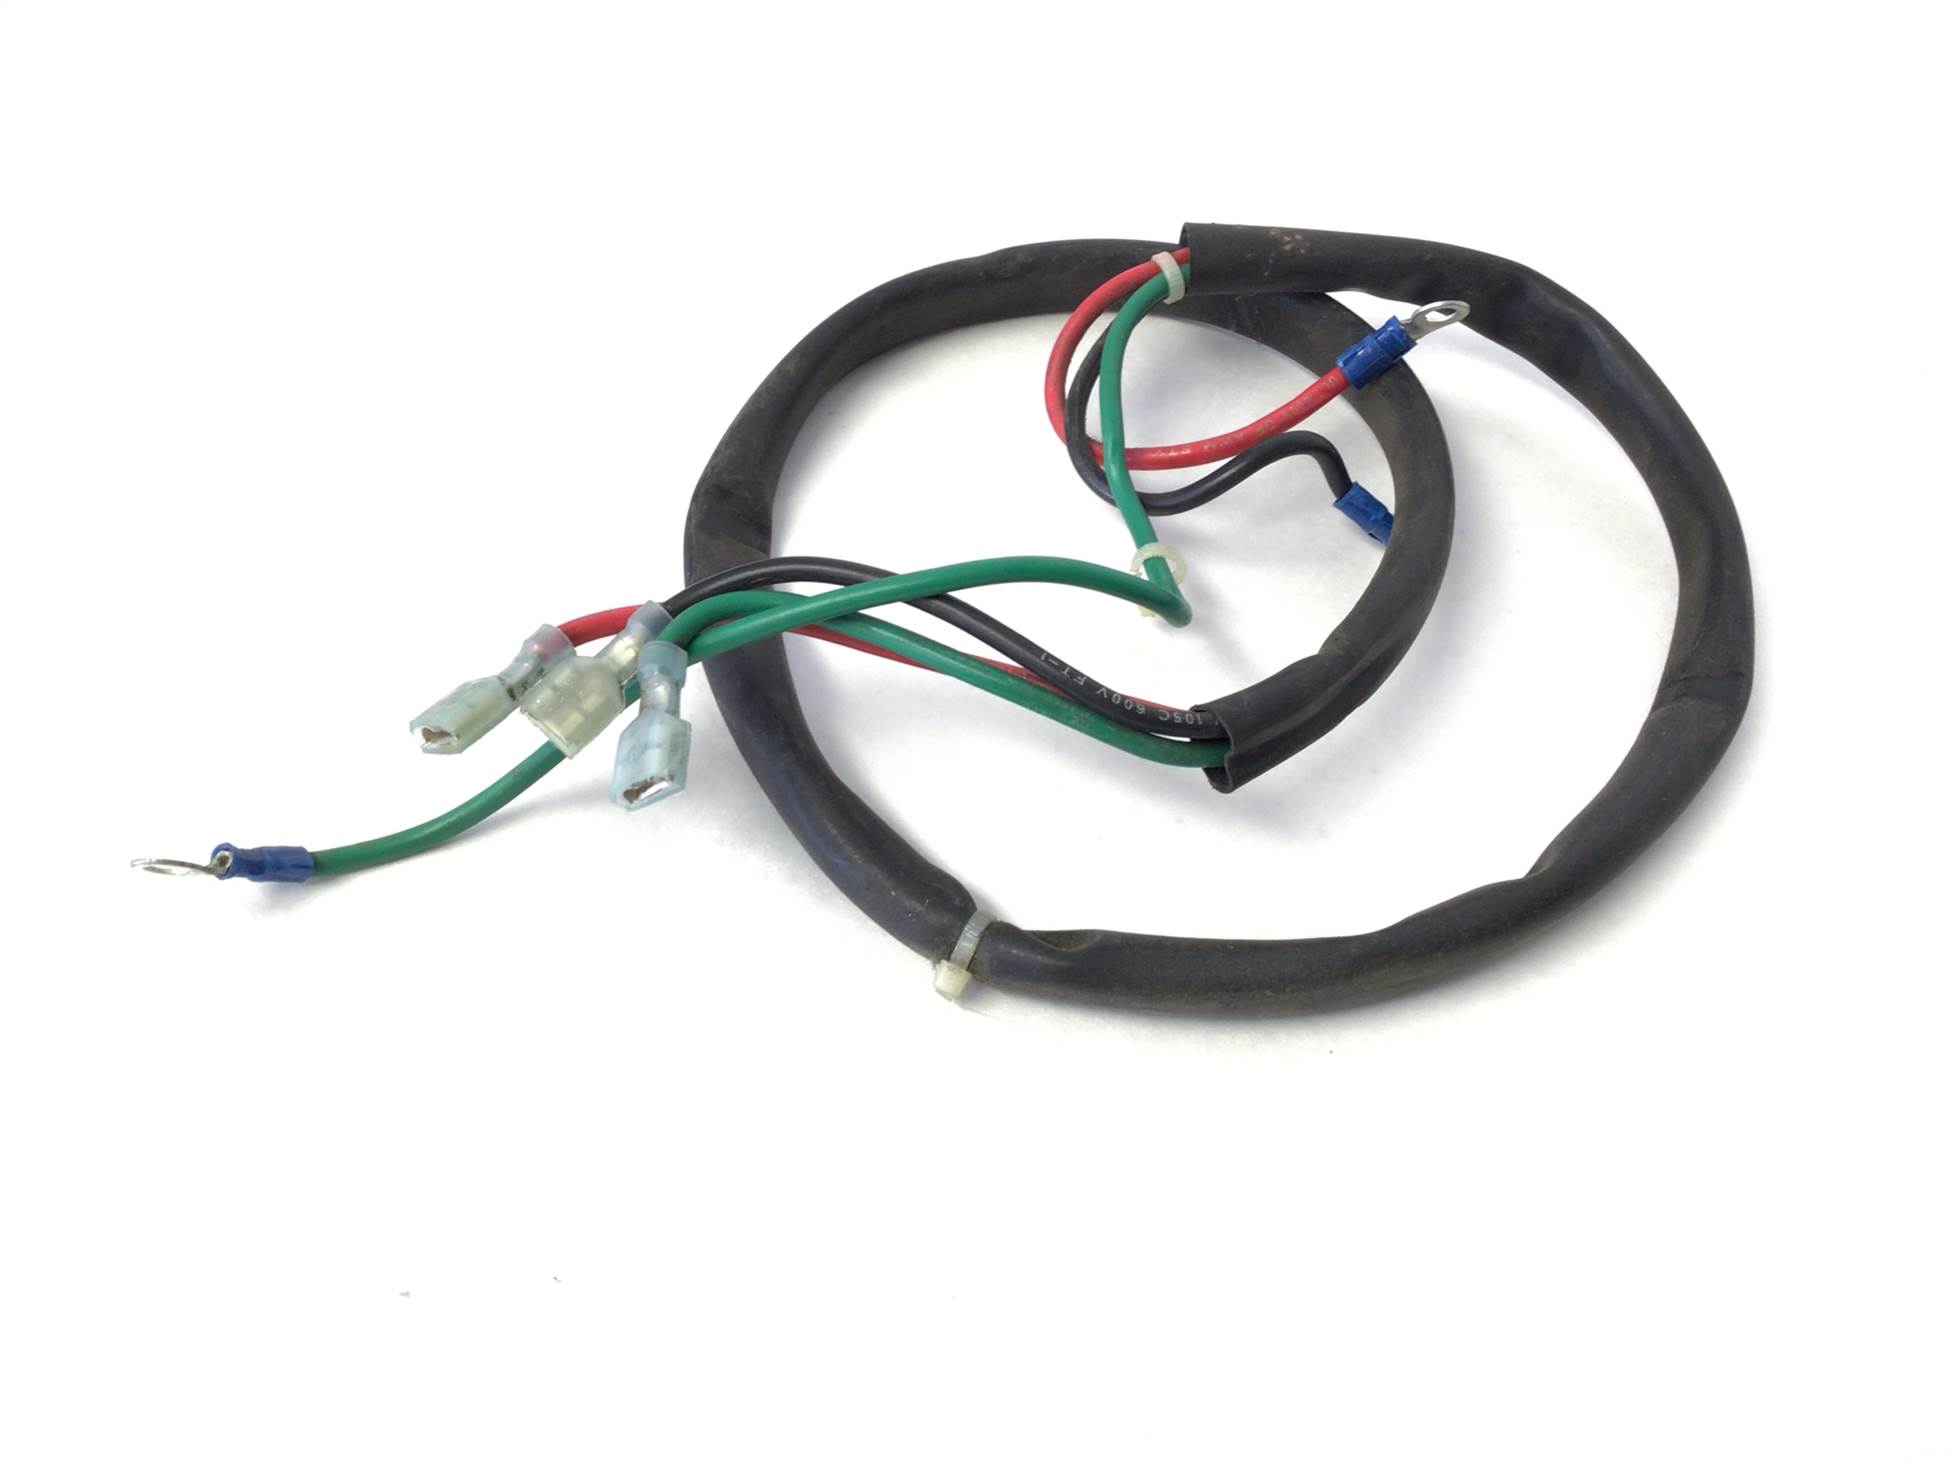 Red Green Black Internal Power Wire Harness (Used)